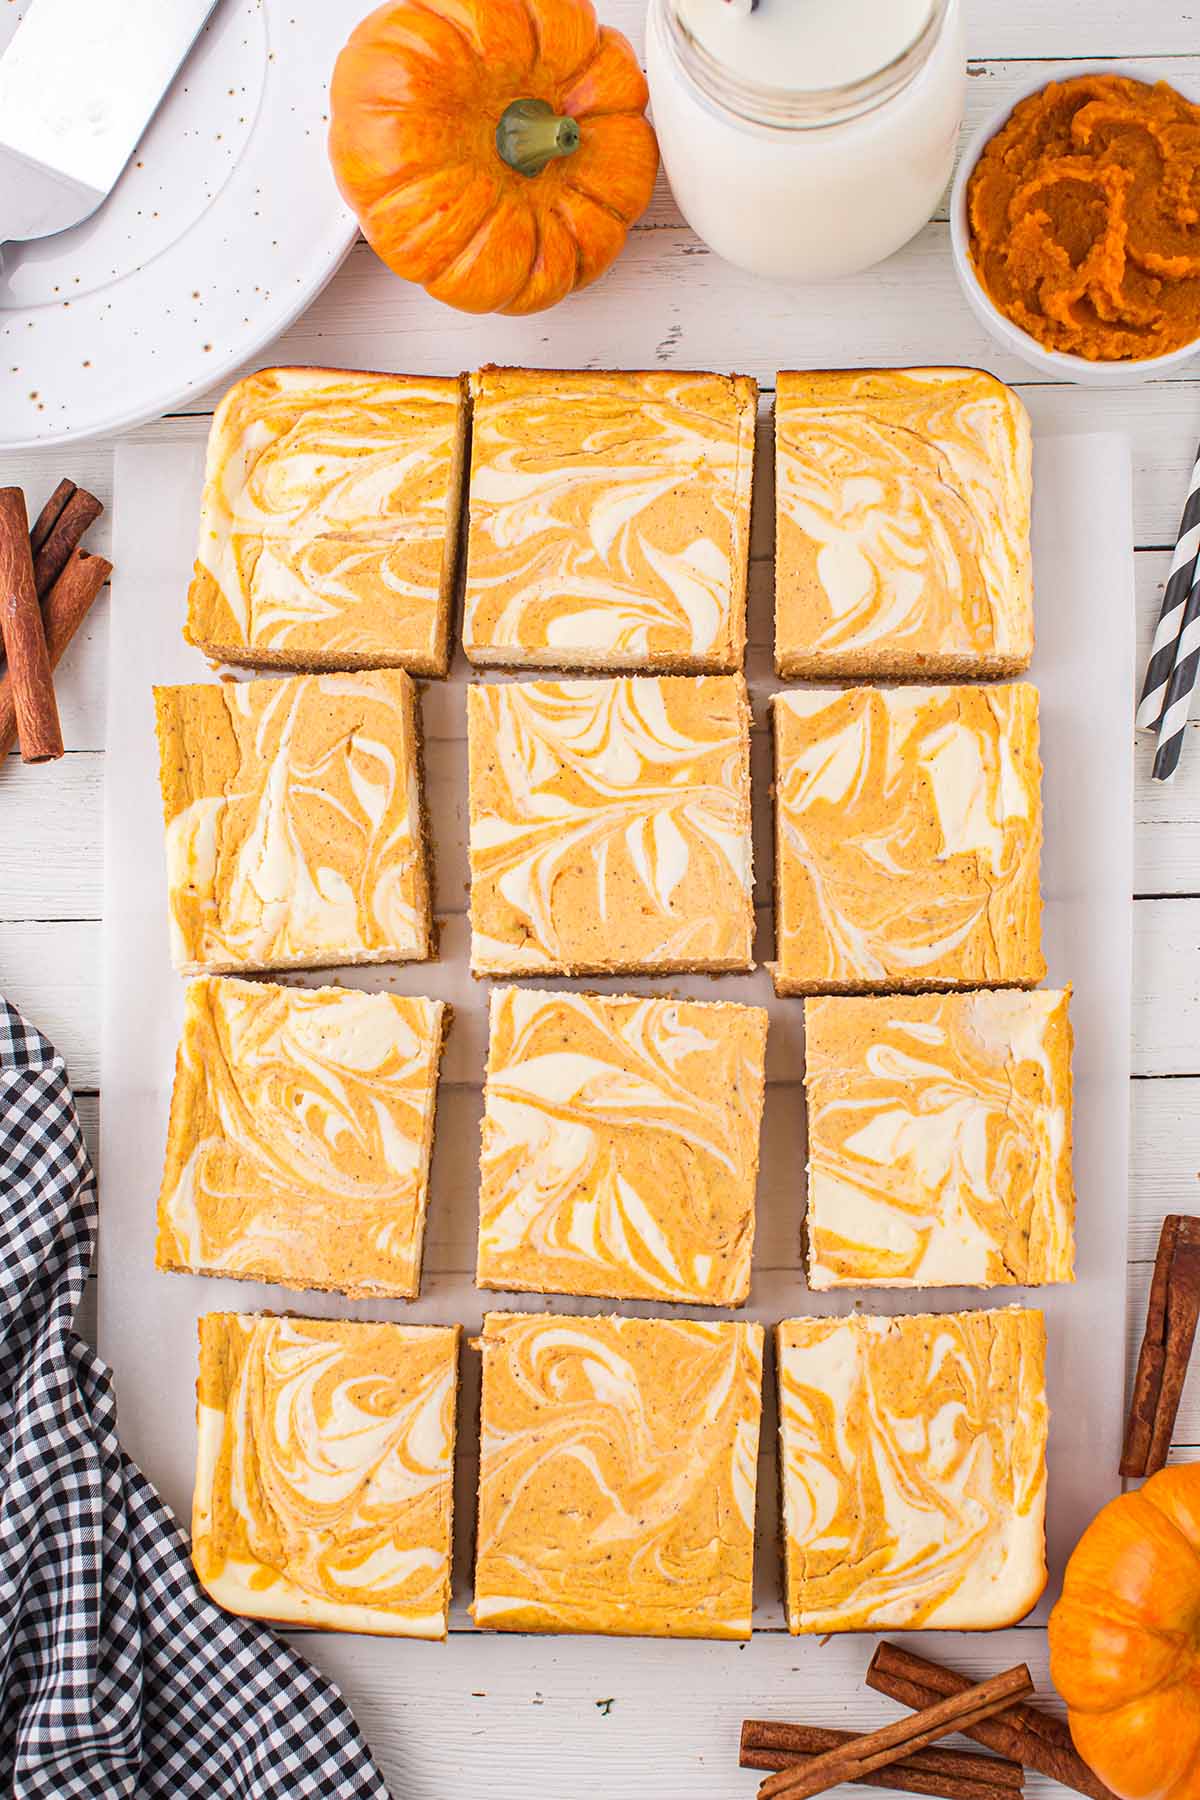 Pumpkin Cheesecake Bars cut into squares with a glass of milk on the background.